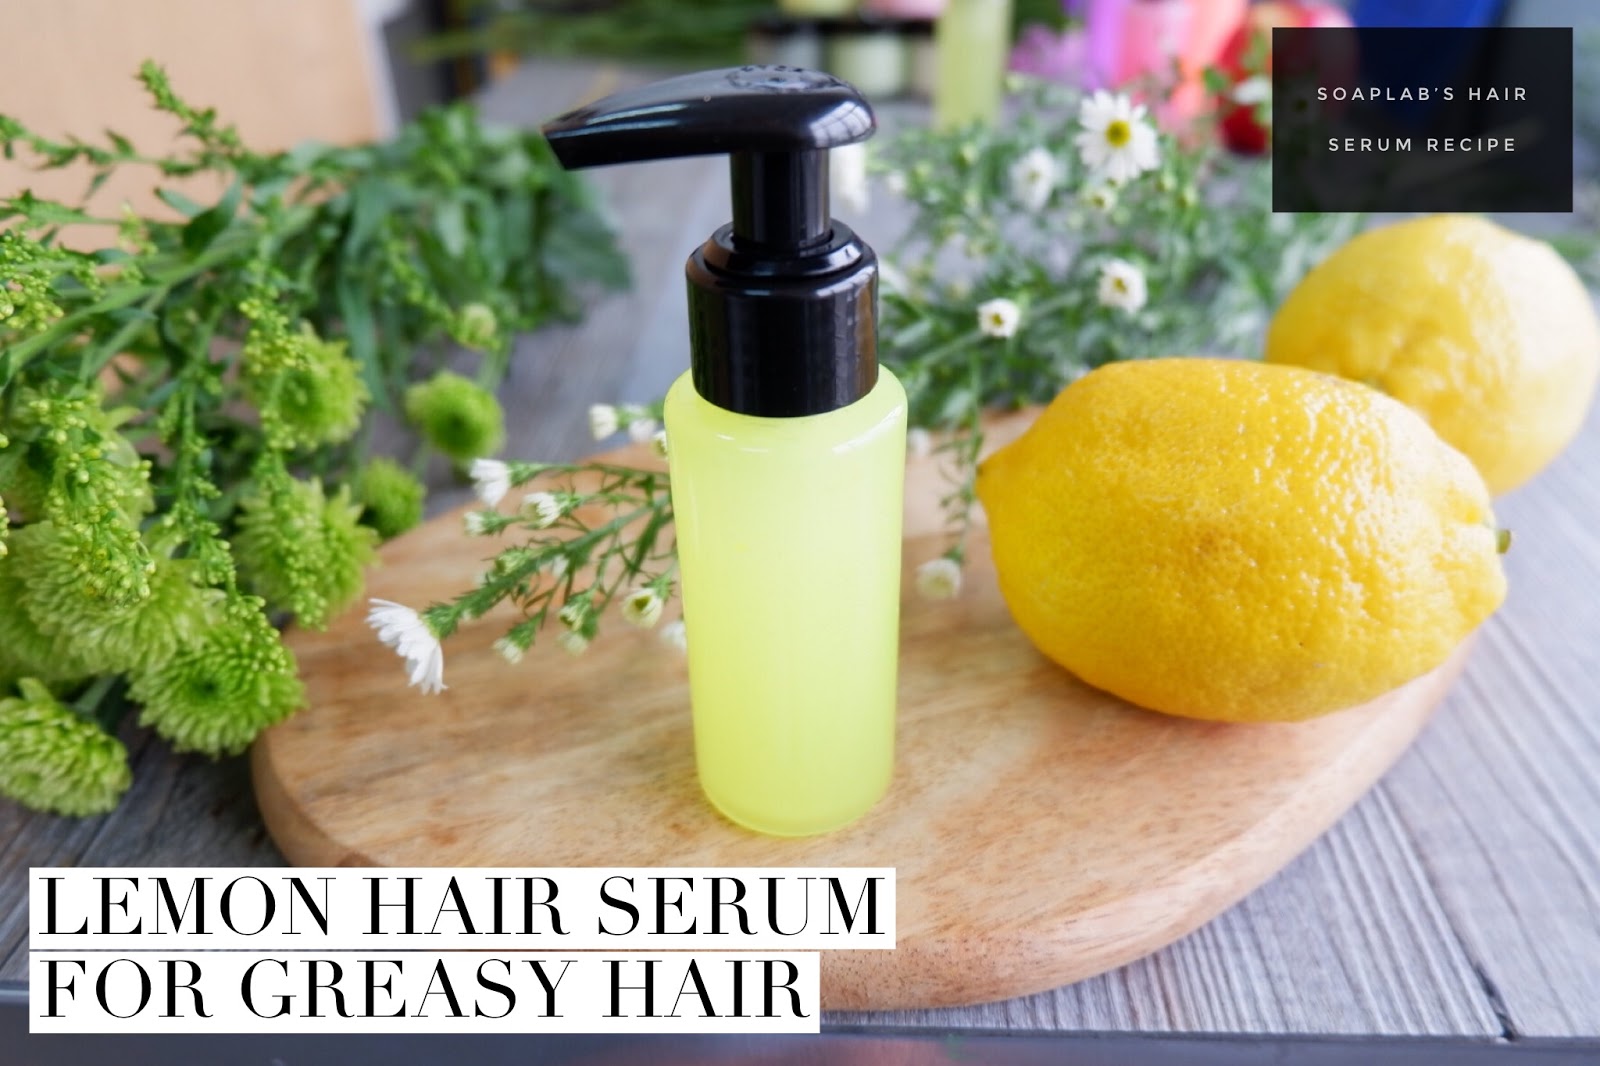 SoapLab Malaysia: How To Make: Lemon Hair Serum for Greasy Hair